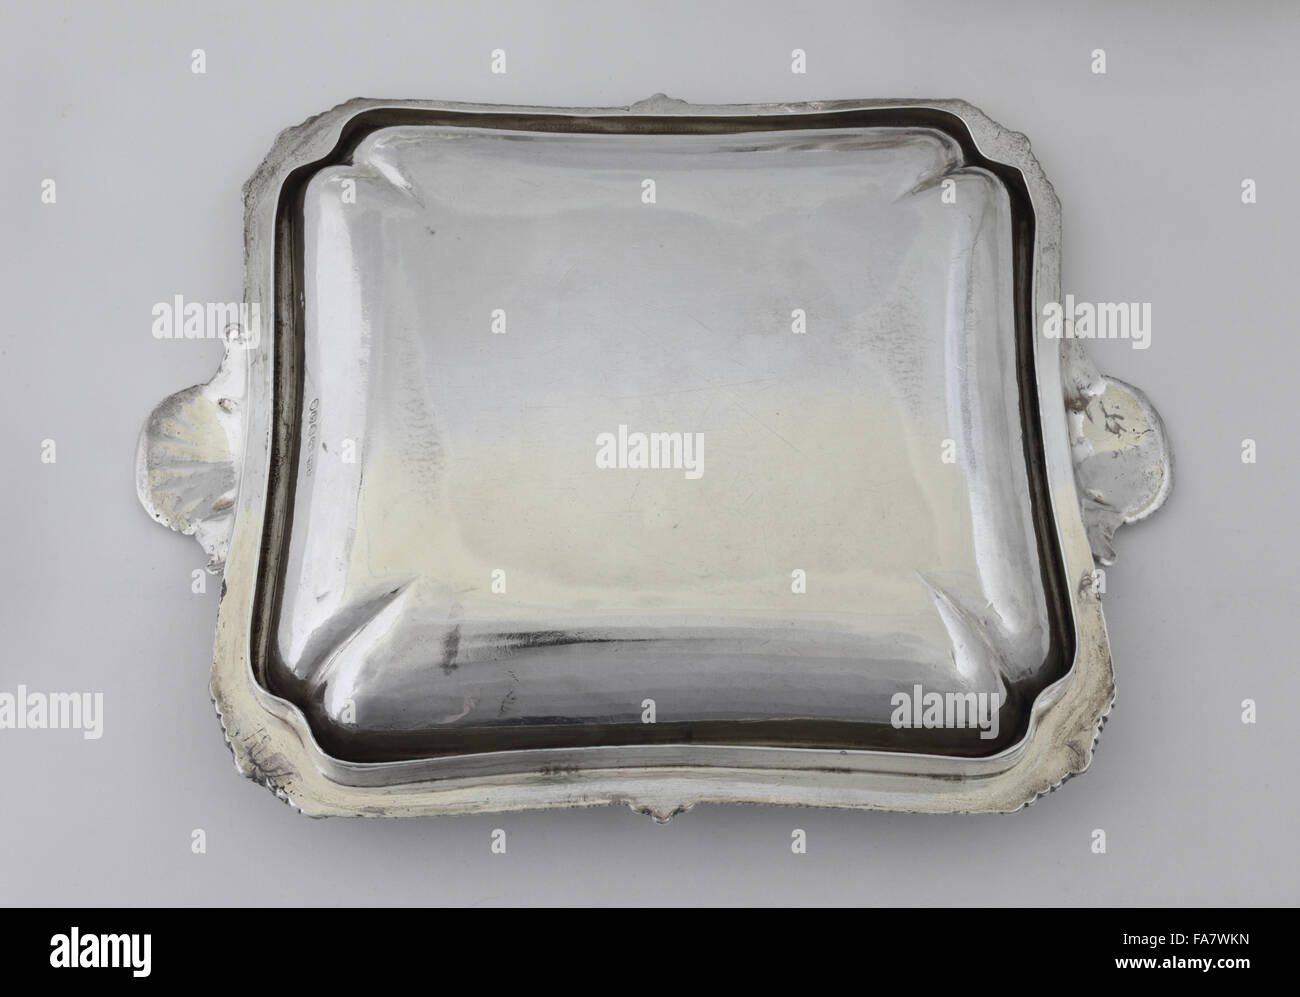 Underside of an oblong entree dish by Paul Store, 1809, part of the silver collection at Ickworth, Suffolk. National Trust inventory number: 852103 Stock Photo